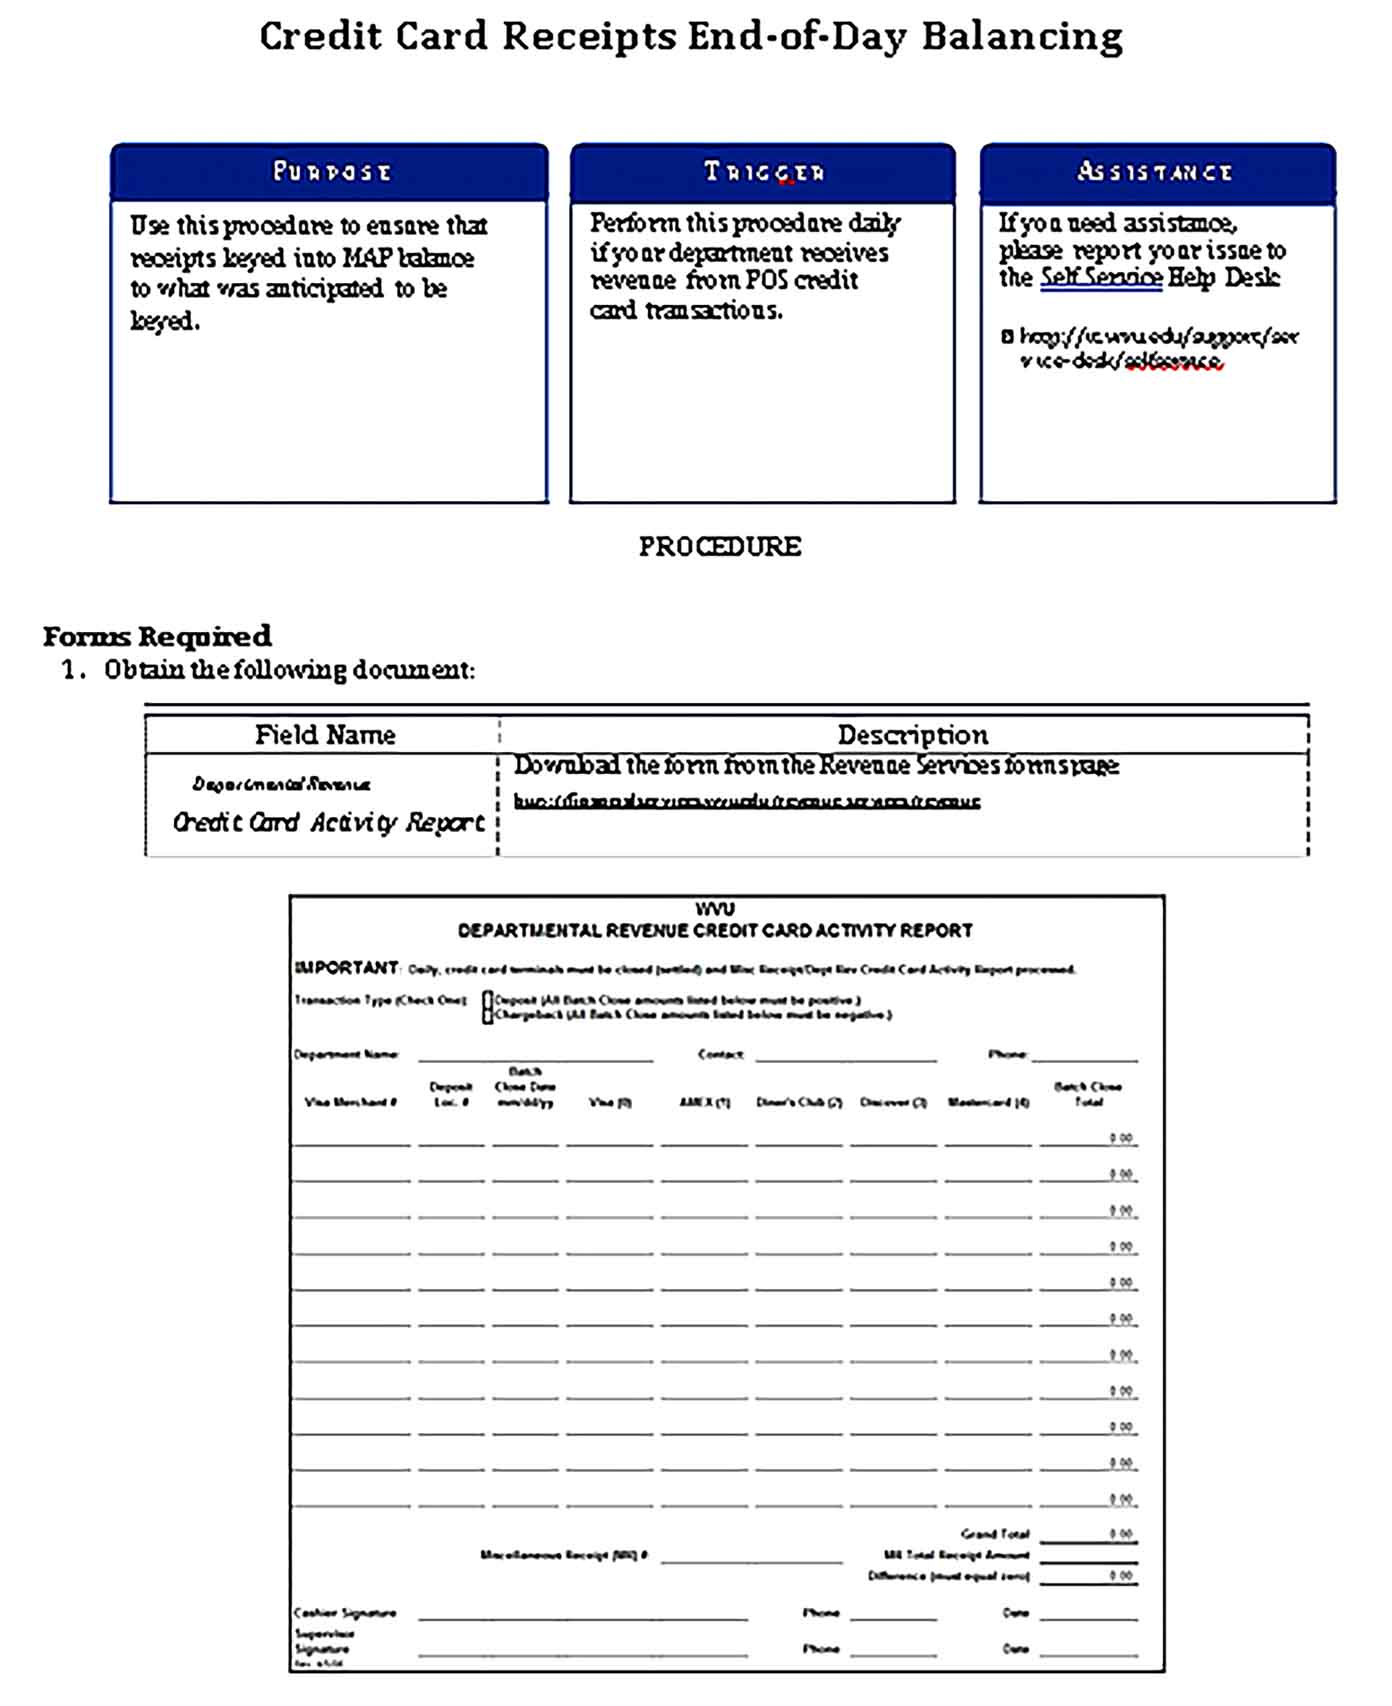 Sample End of Day Credit Card Receipt Form Templates